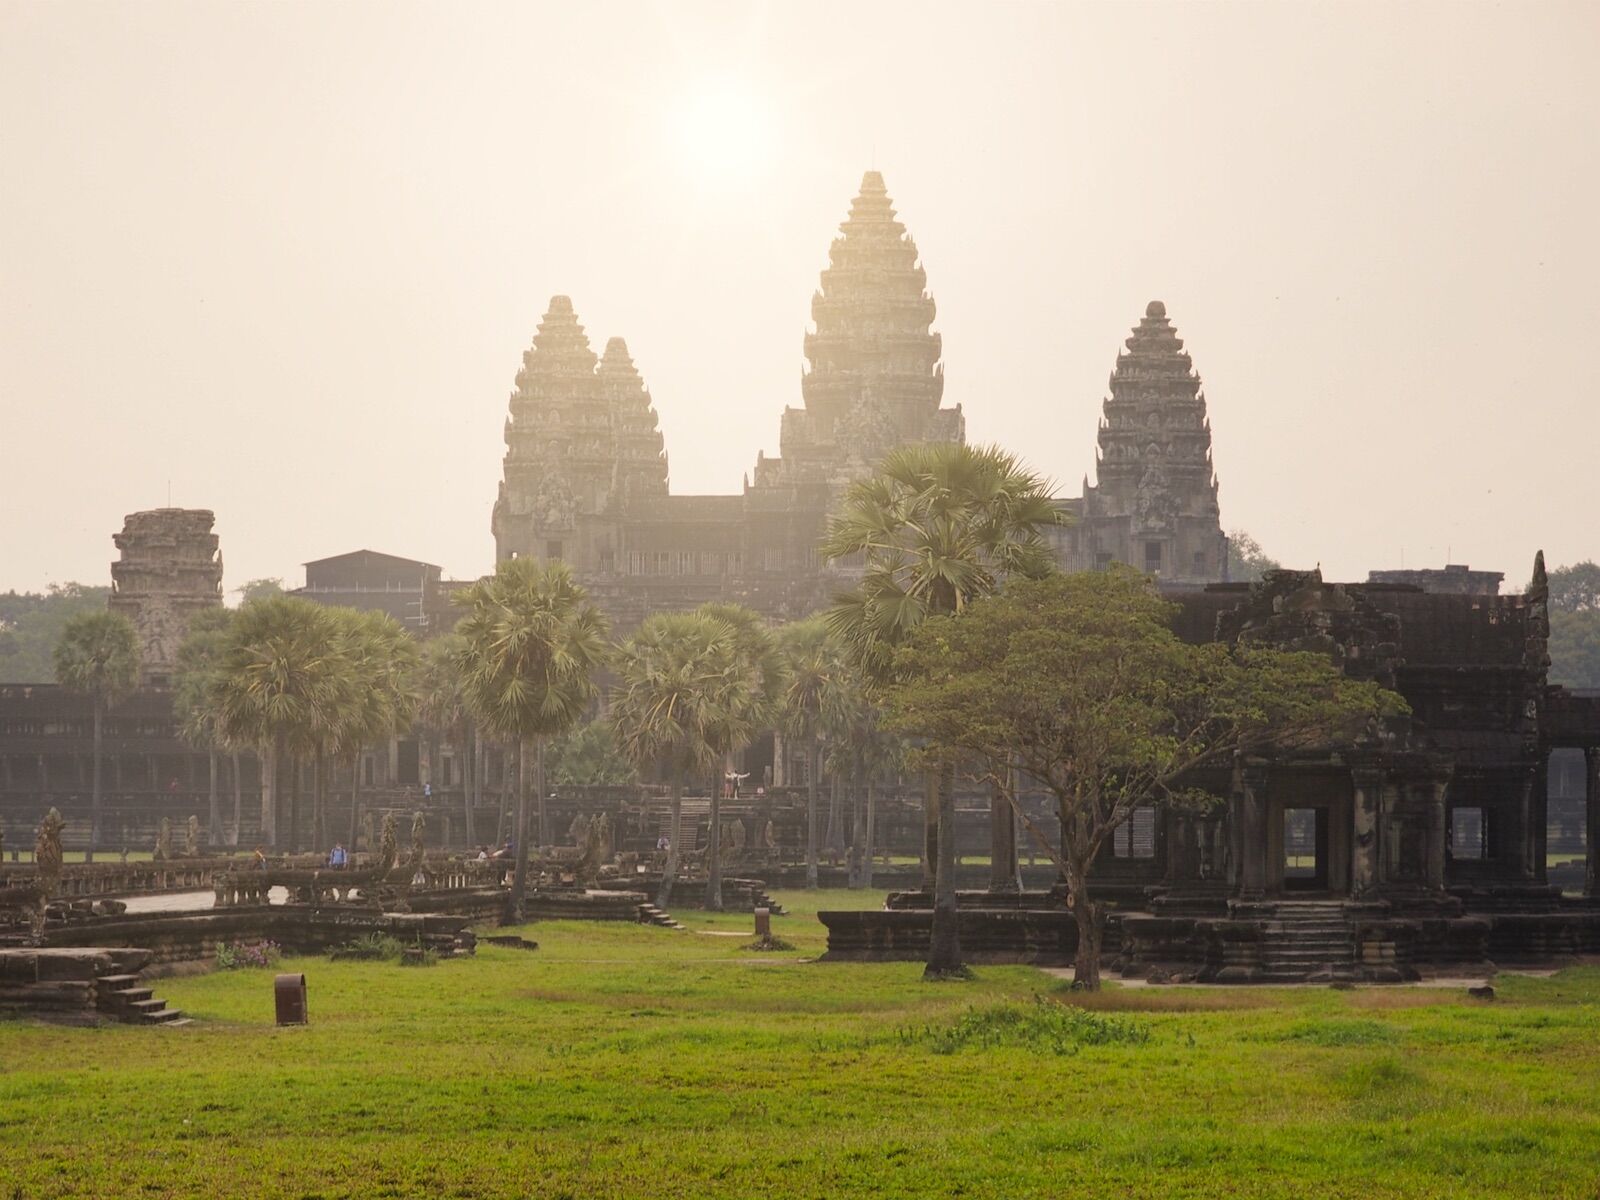 Temple in Angkor, an ancient city near Siem Reap in Cambodia